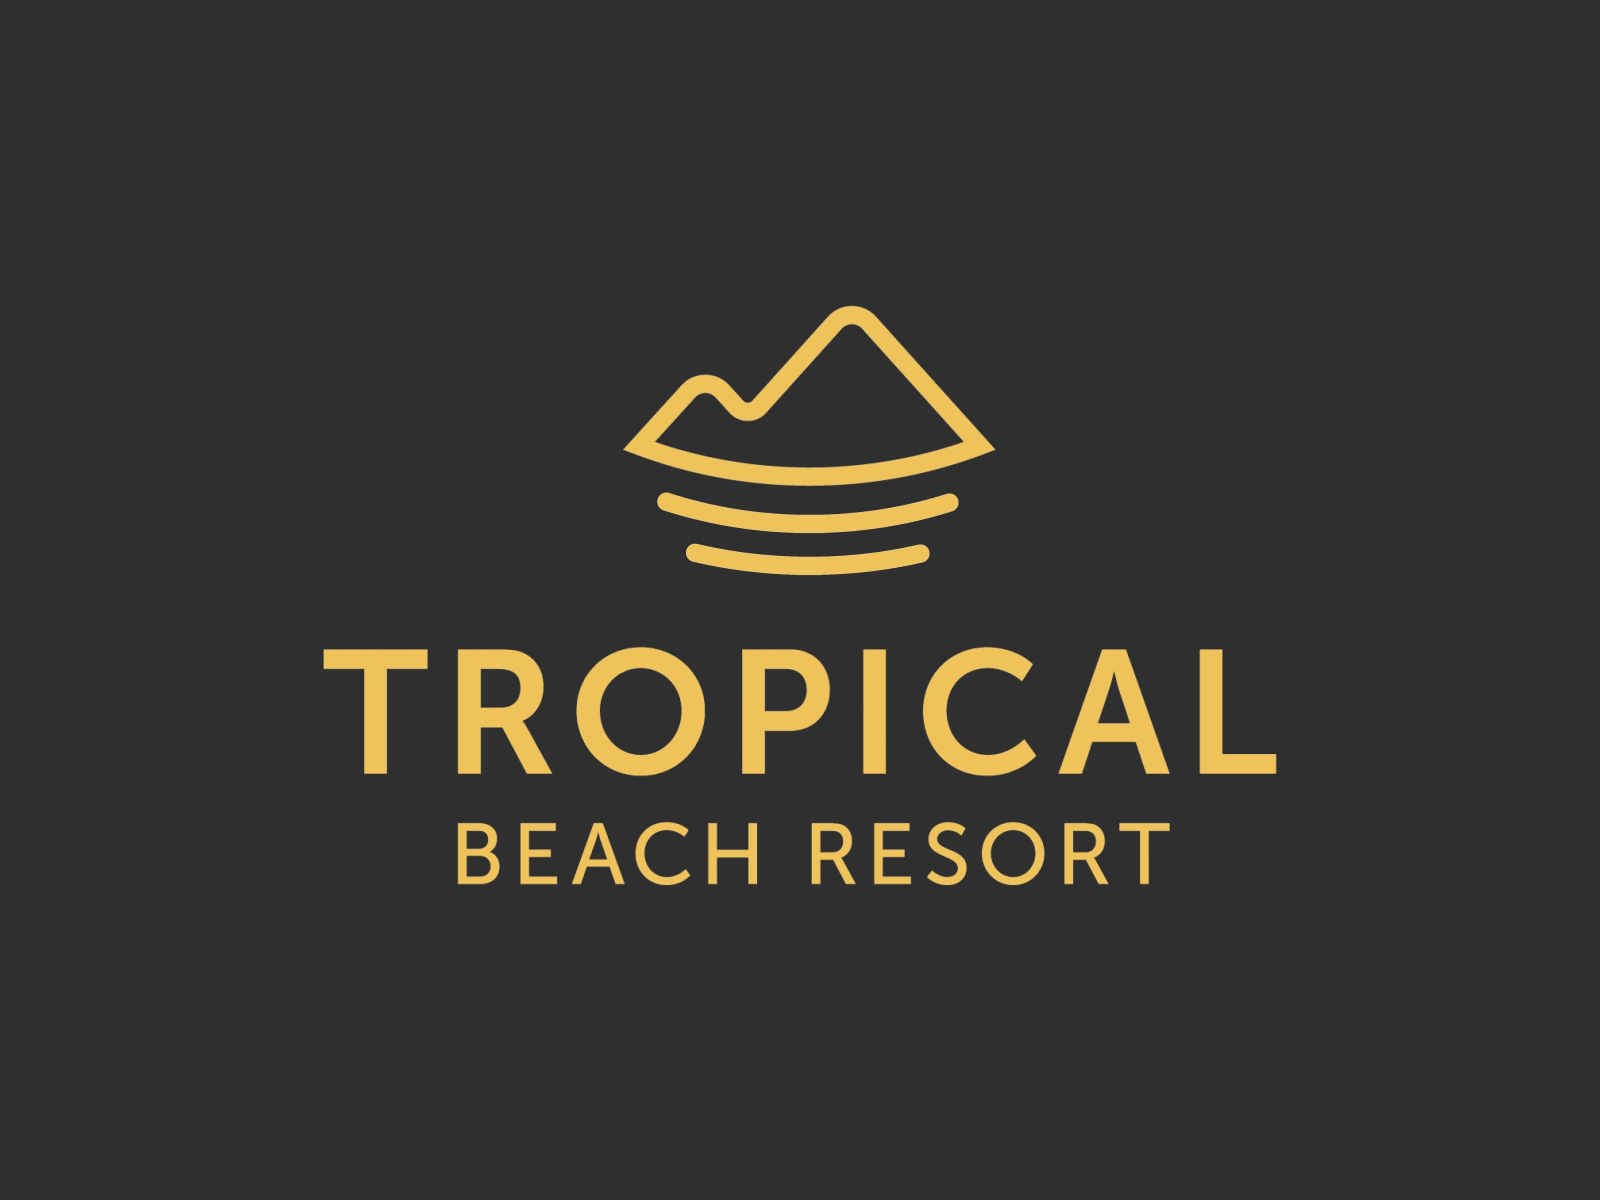 Animated logo and design for Tropical Beach Resort